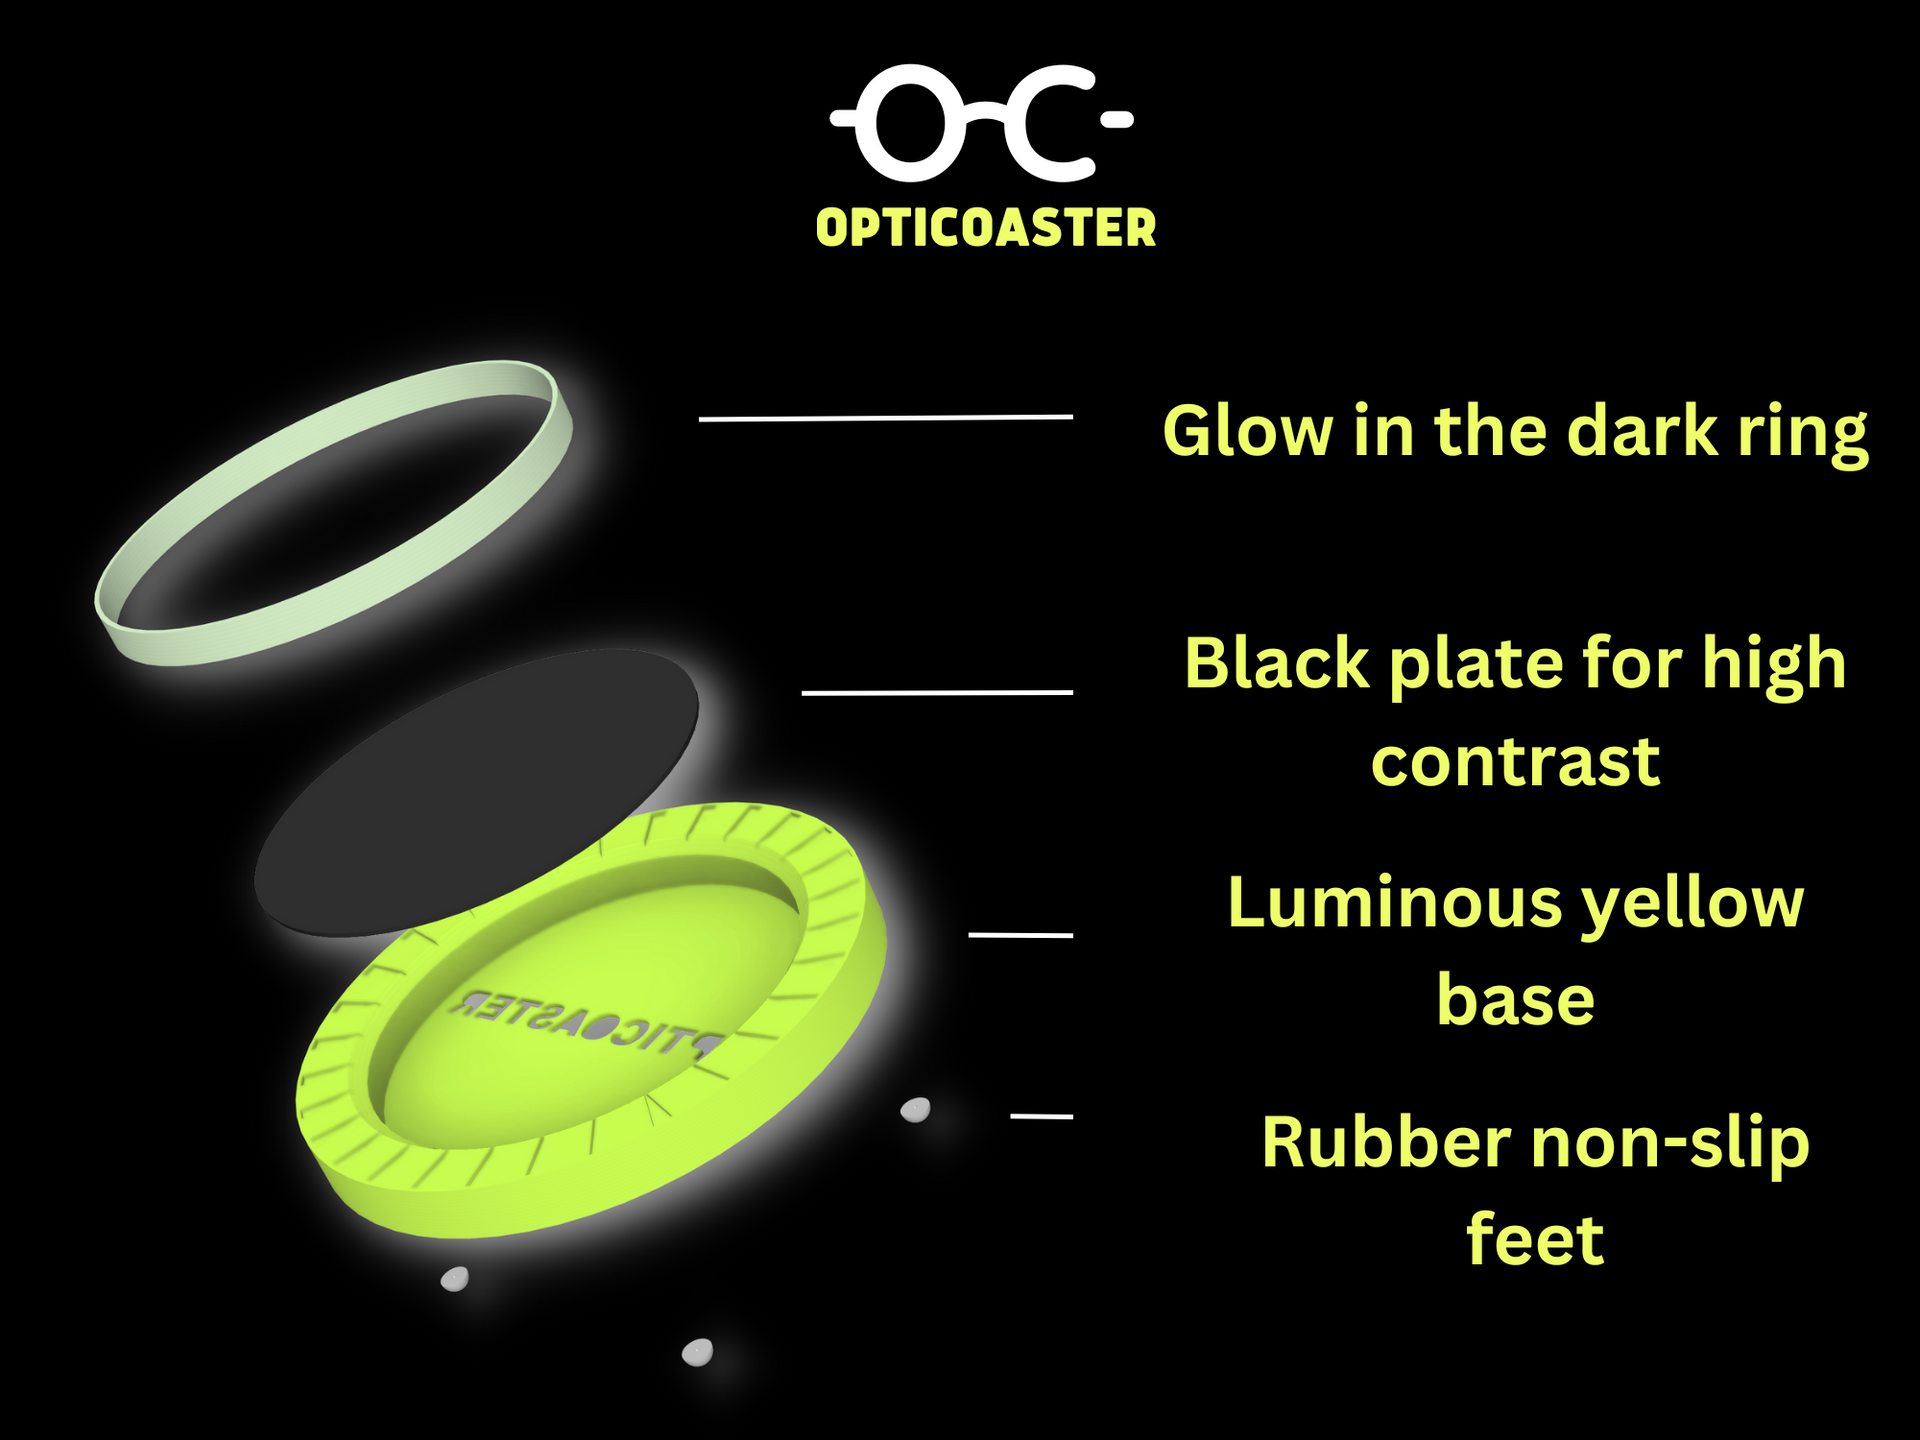 Opticoaster's features